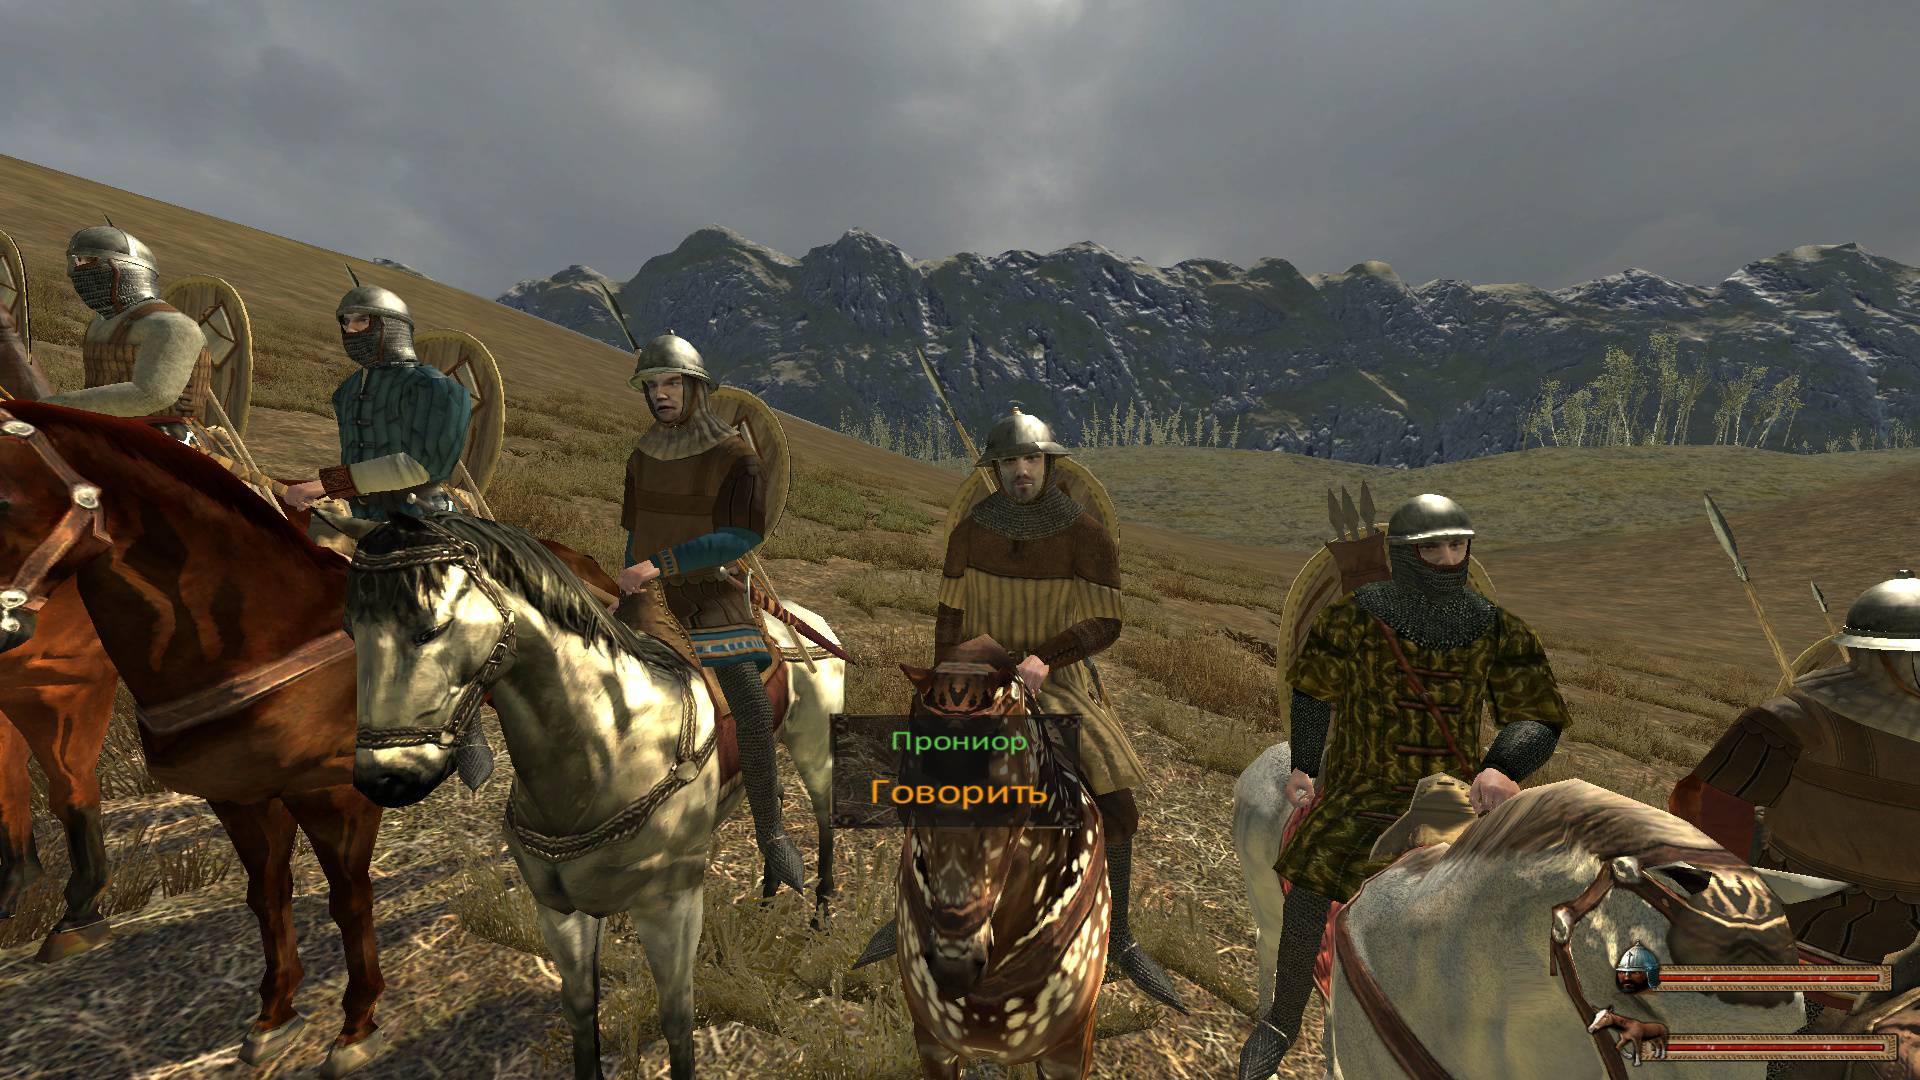 Стим warband. Warband Medieval Conquest. Medieval Conquest Mount Blade Warband. Мод для варбанд Medieval Conquest. Medieval Conquest русификатор.